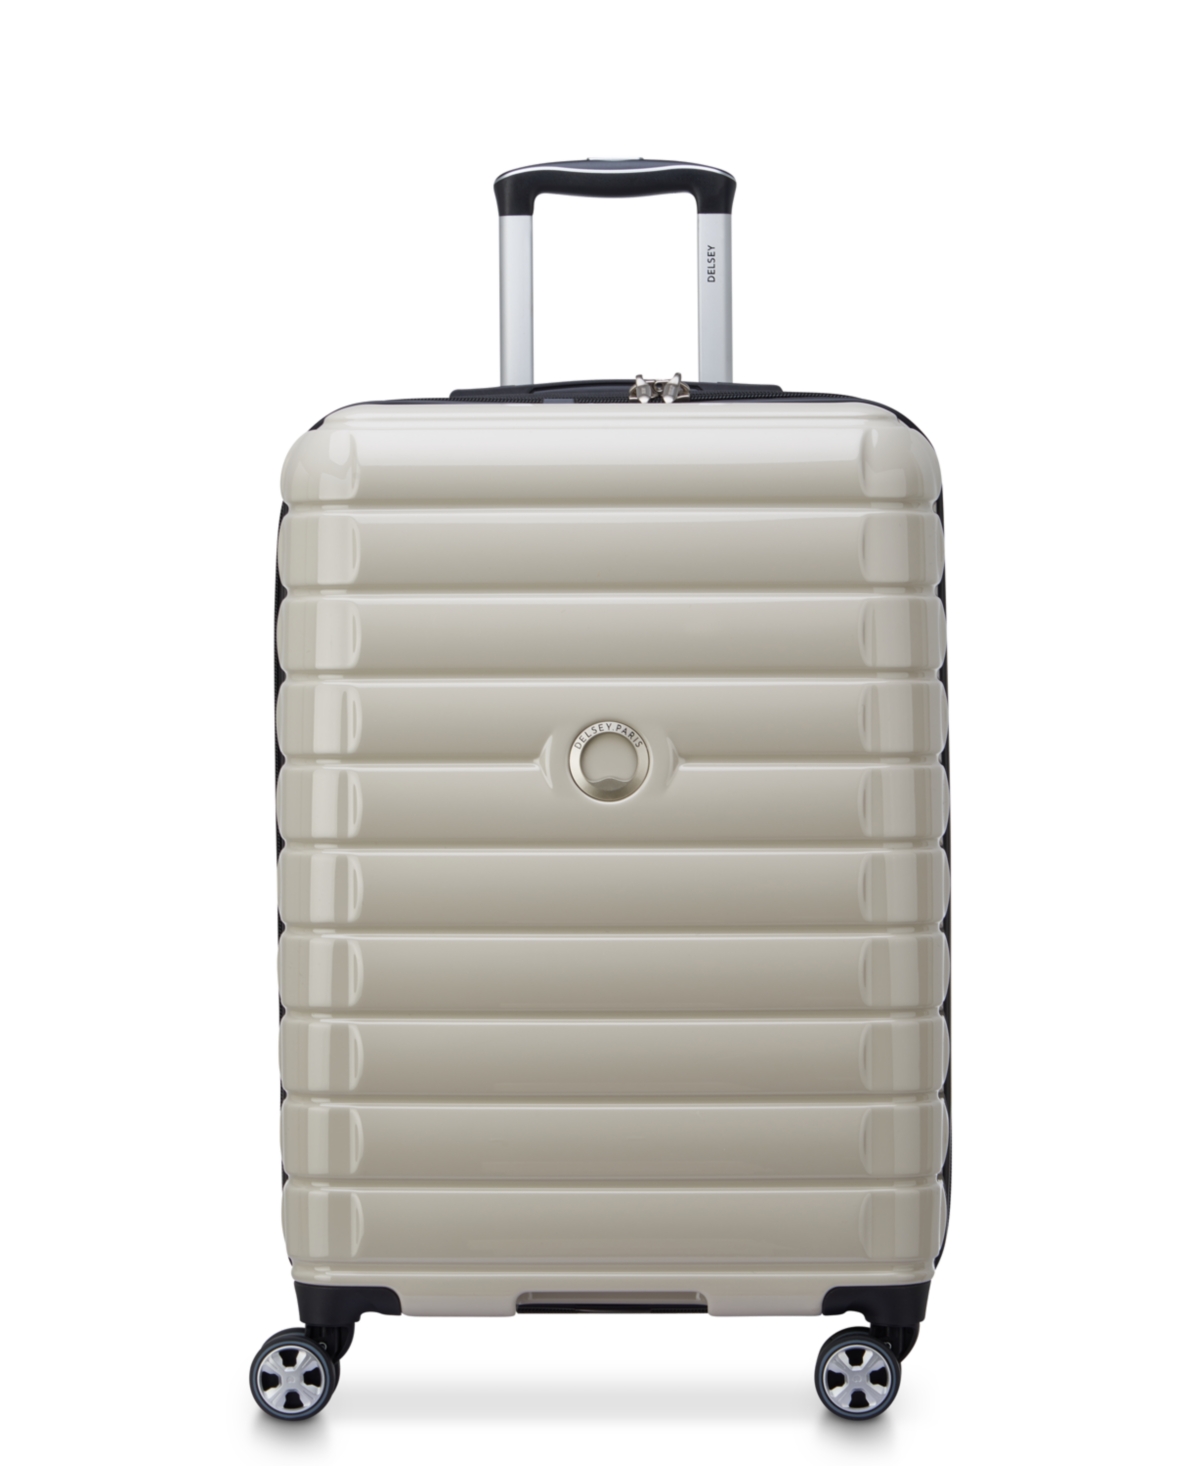 Delsey Shadow 5.0 Expandable 24" Check-in Spinner Luggage In Latte